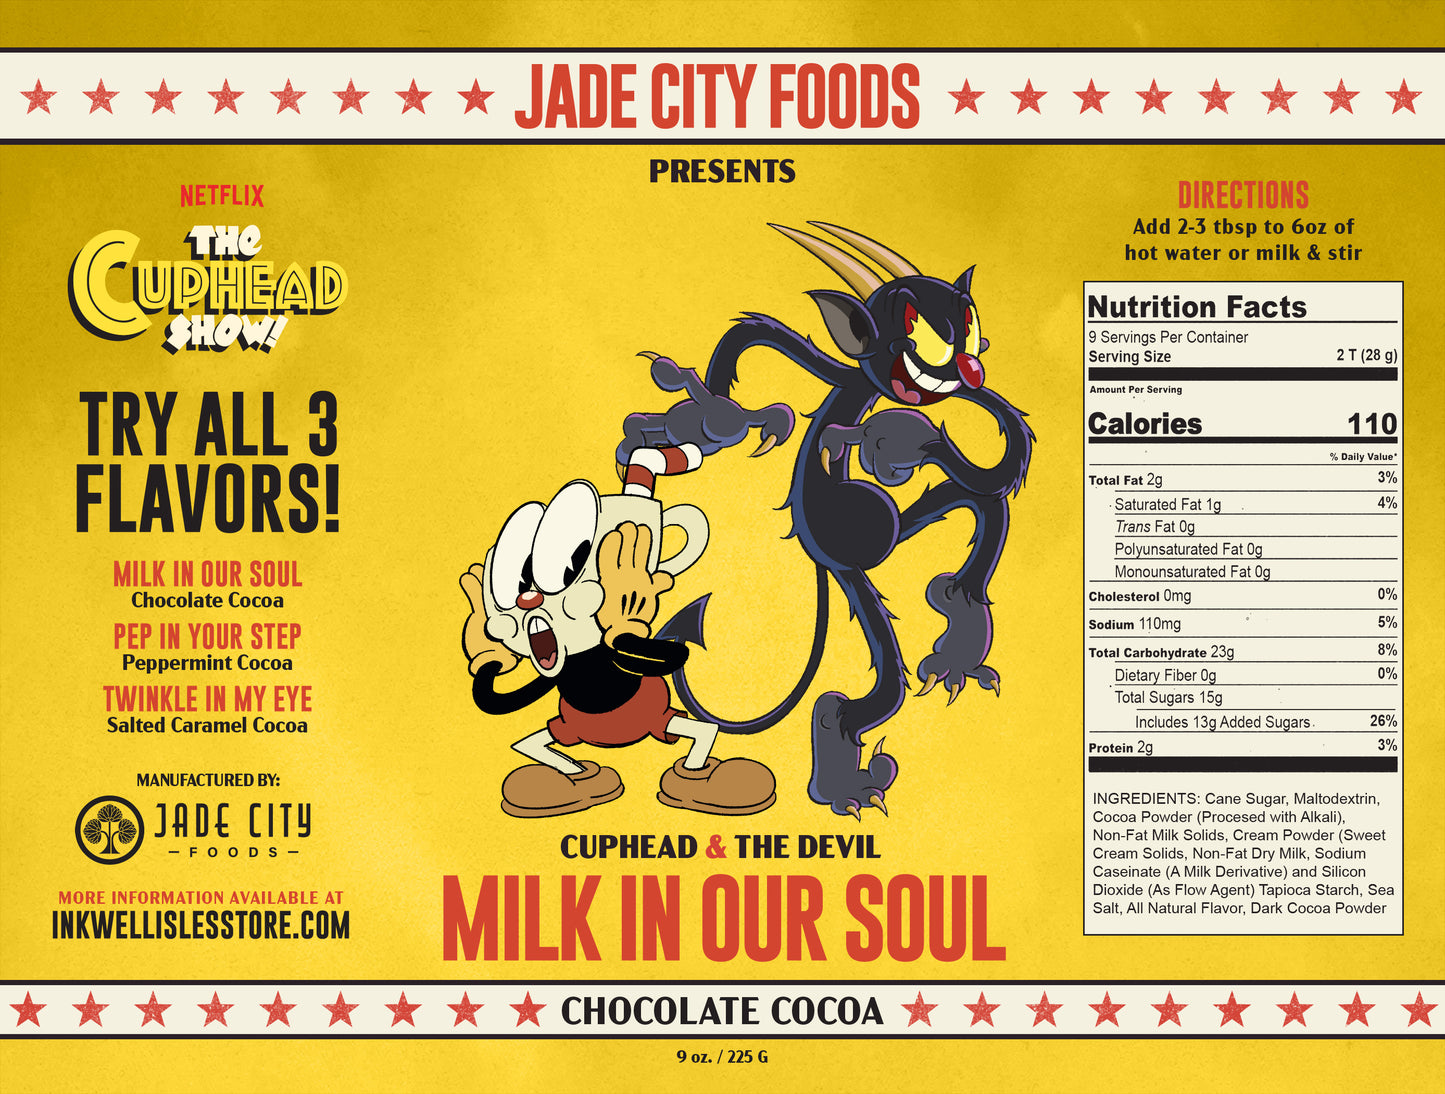 Cuphead & The Devil's Milk In Our Soul: Chocolate Cocoa